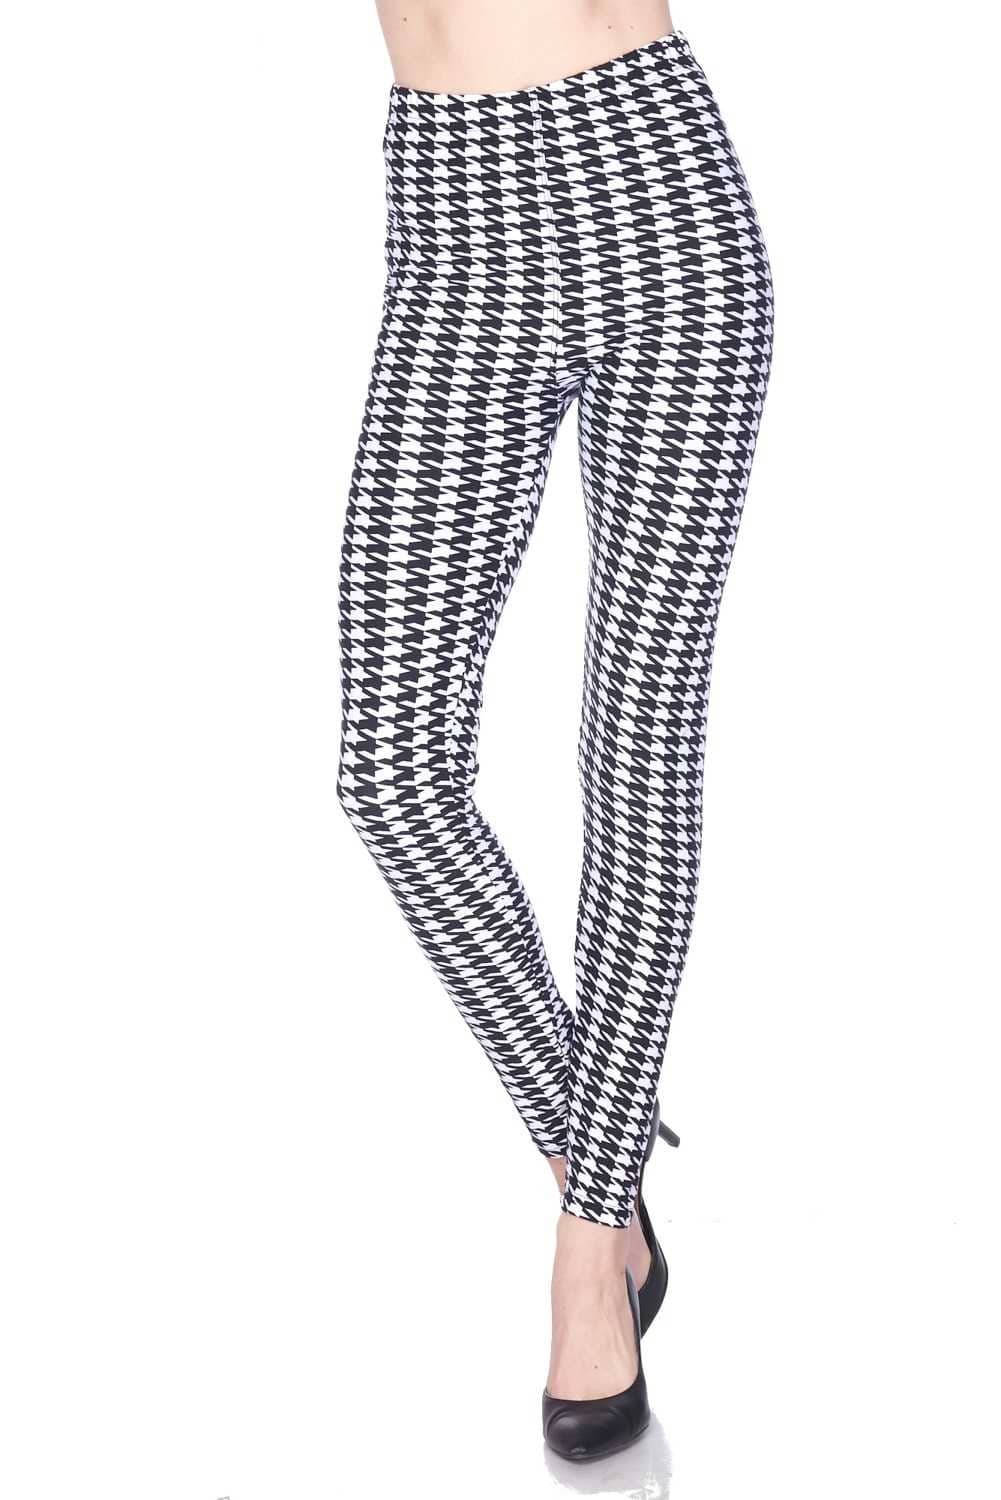 Brushed Hounds-tooth Print Ankle Leggings